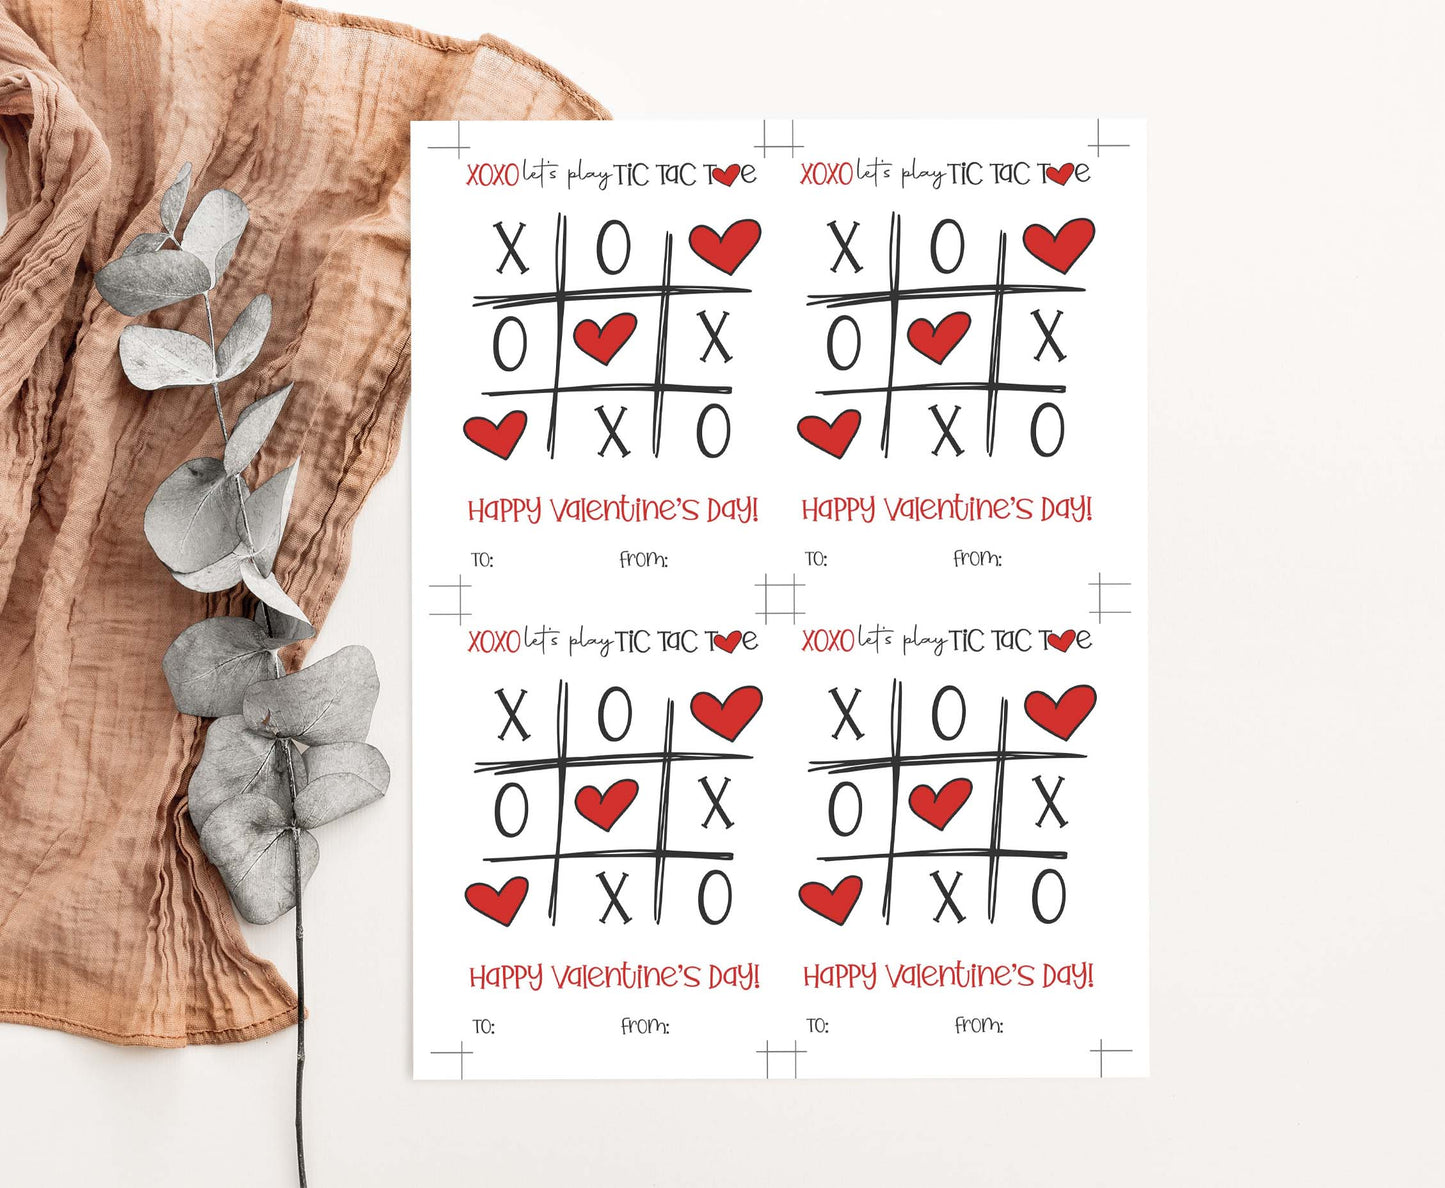 XOXO let's play Tic Tac Toe Cookie Card | Happy Valentines Printable Cards - 119